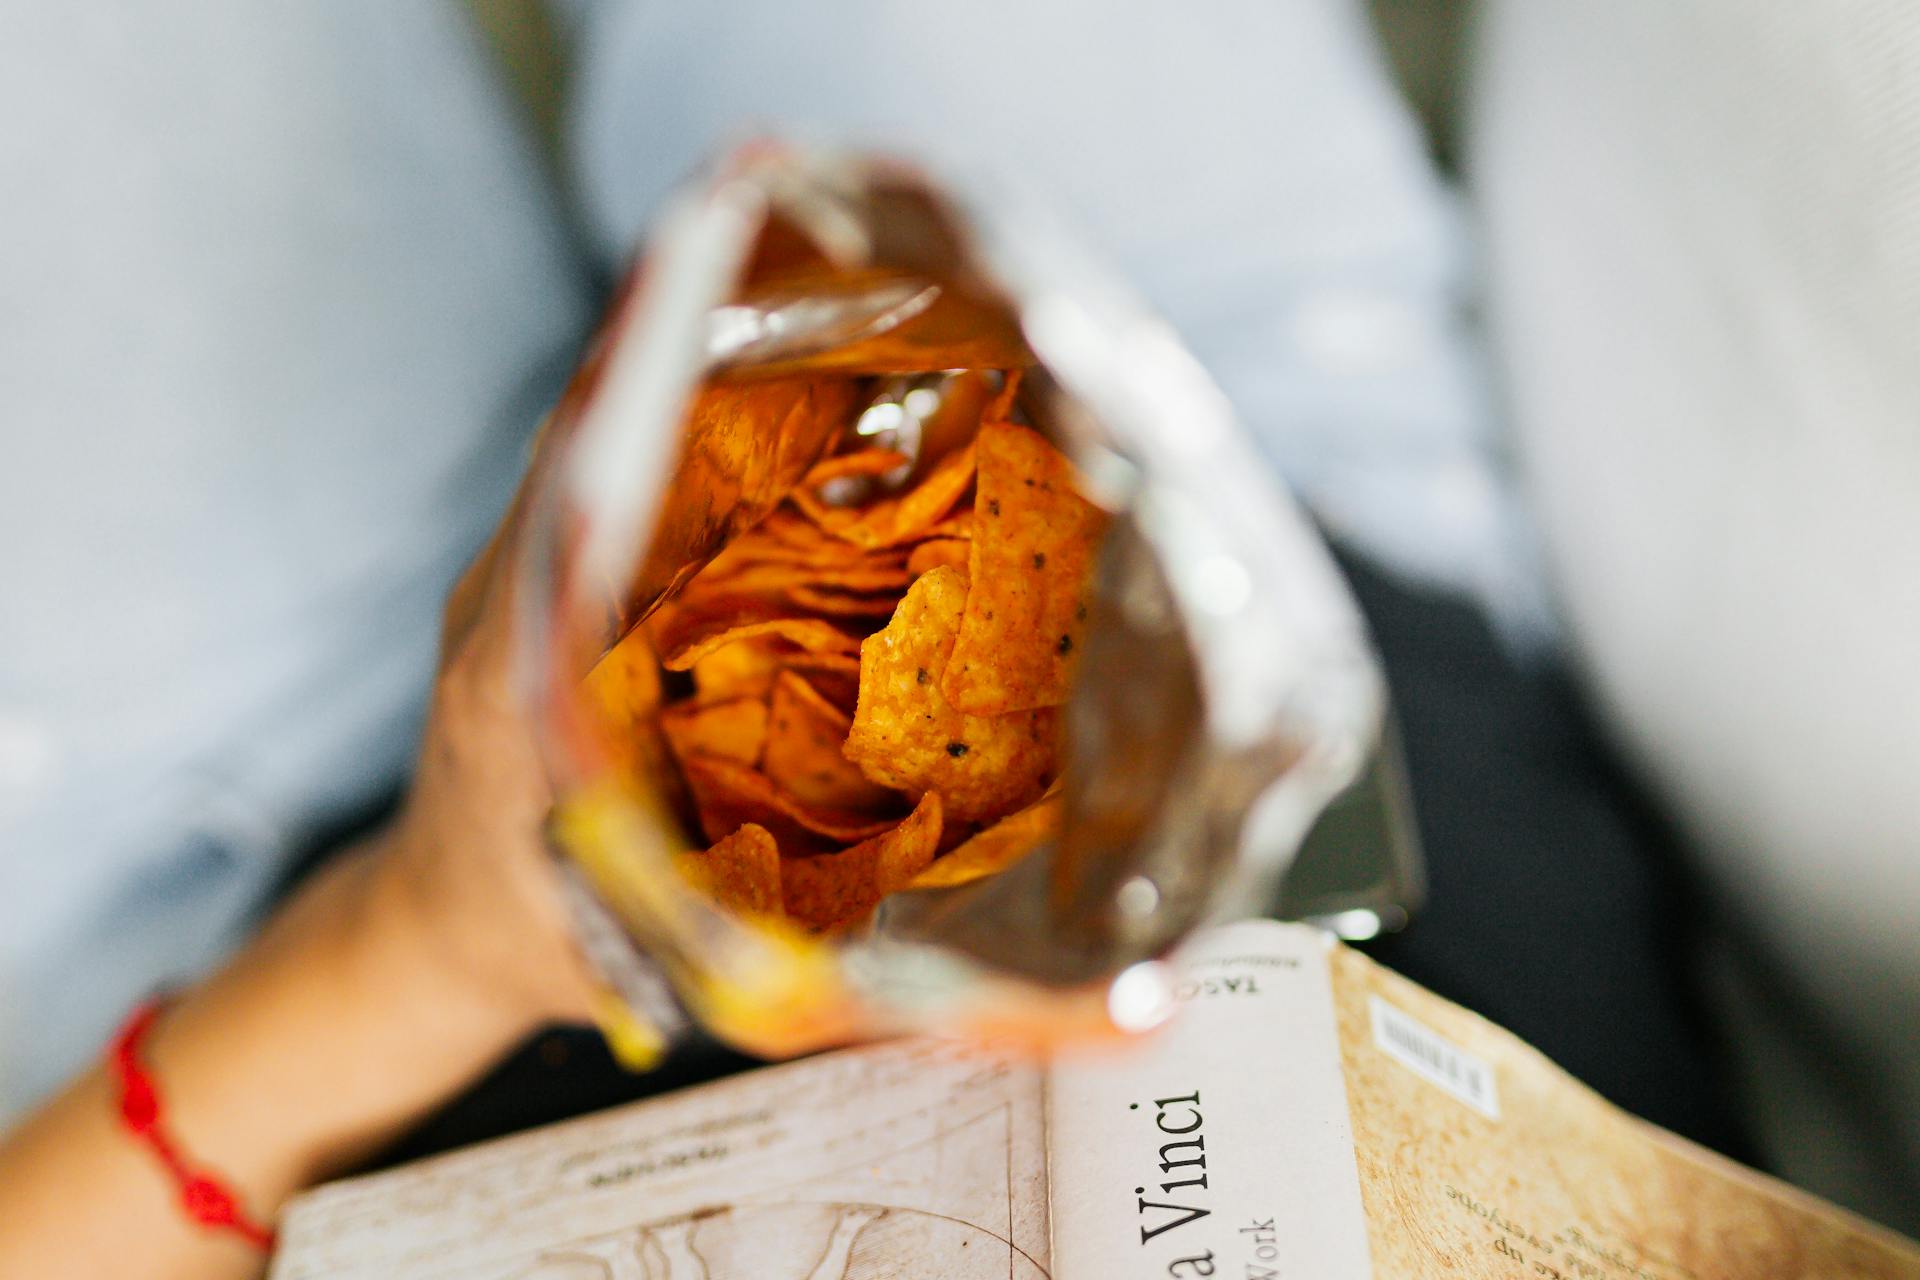 A person holding a bag of chips | Source: Pexels